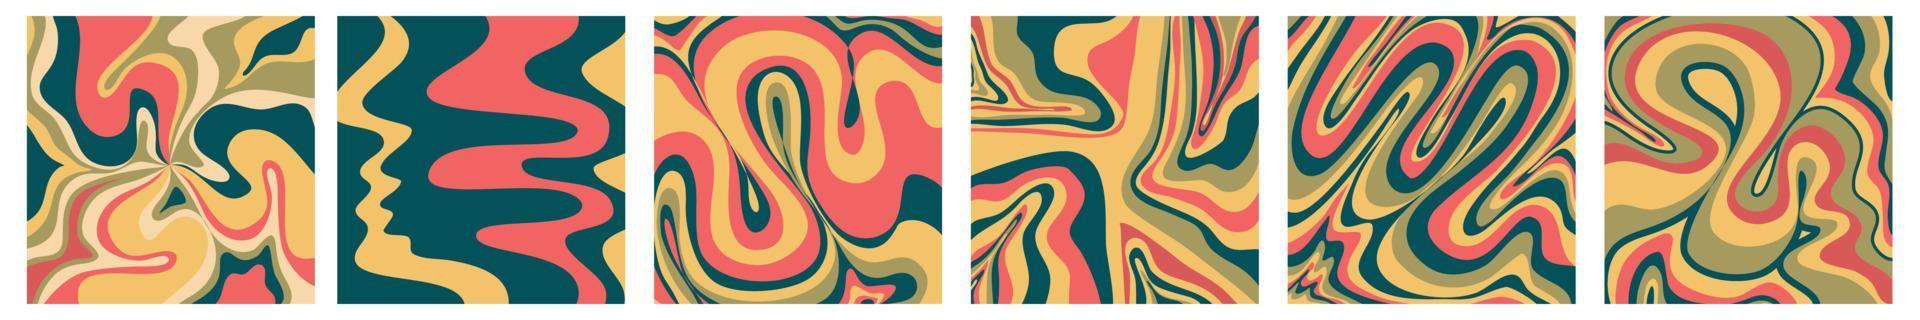 Groovy wave retro background with swirl set collection. Retro color hippy. Simple twirl trendy design. Wavy marble groovy pattern vector